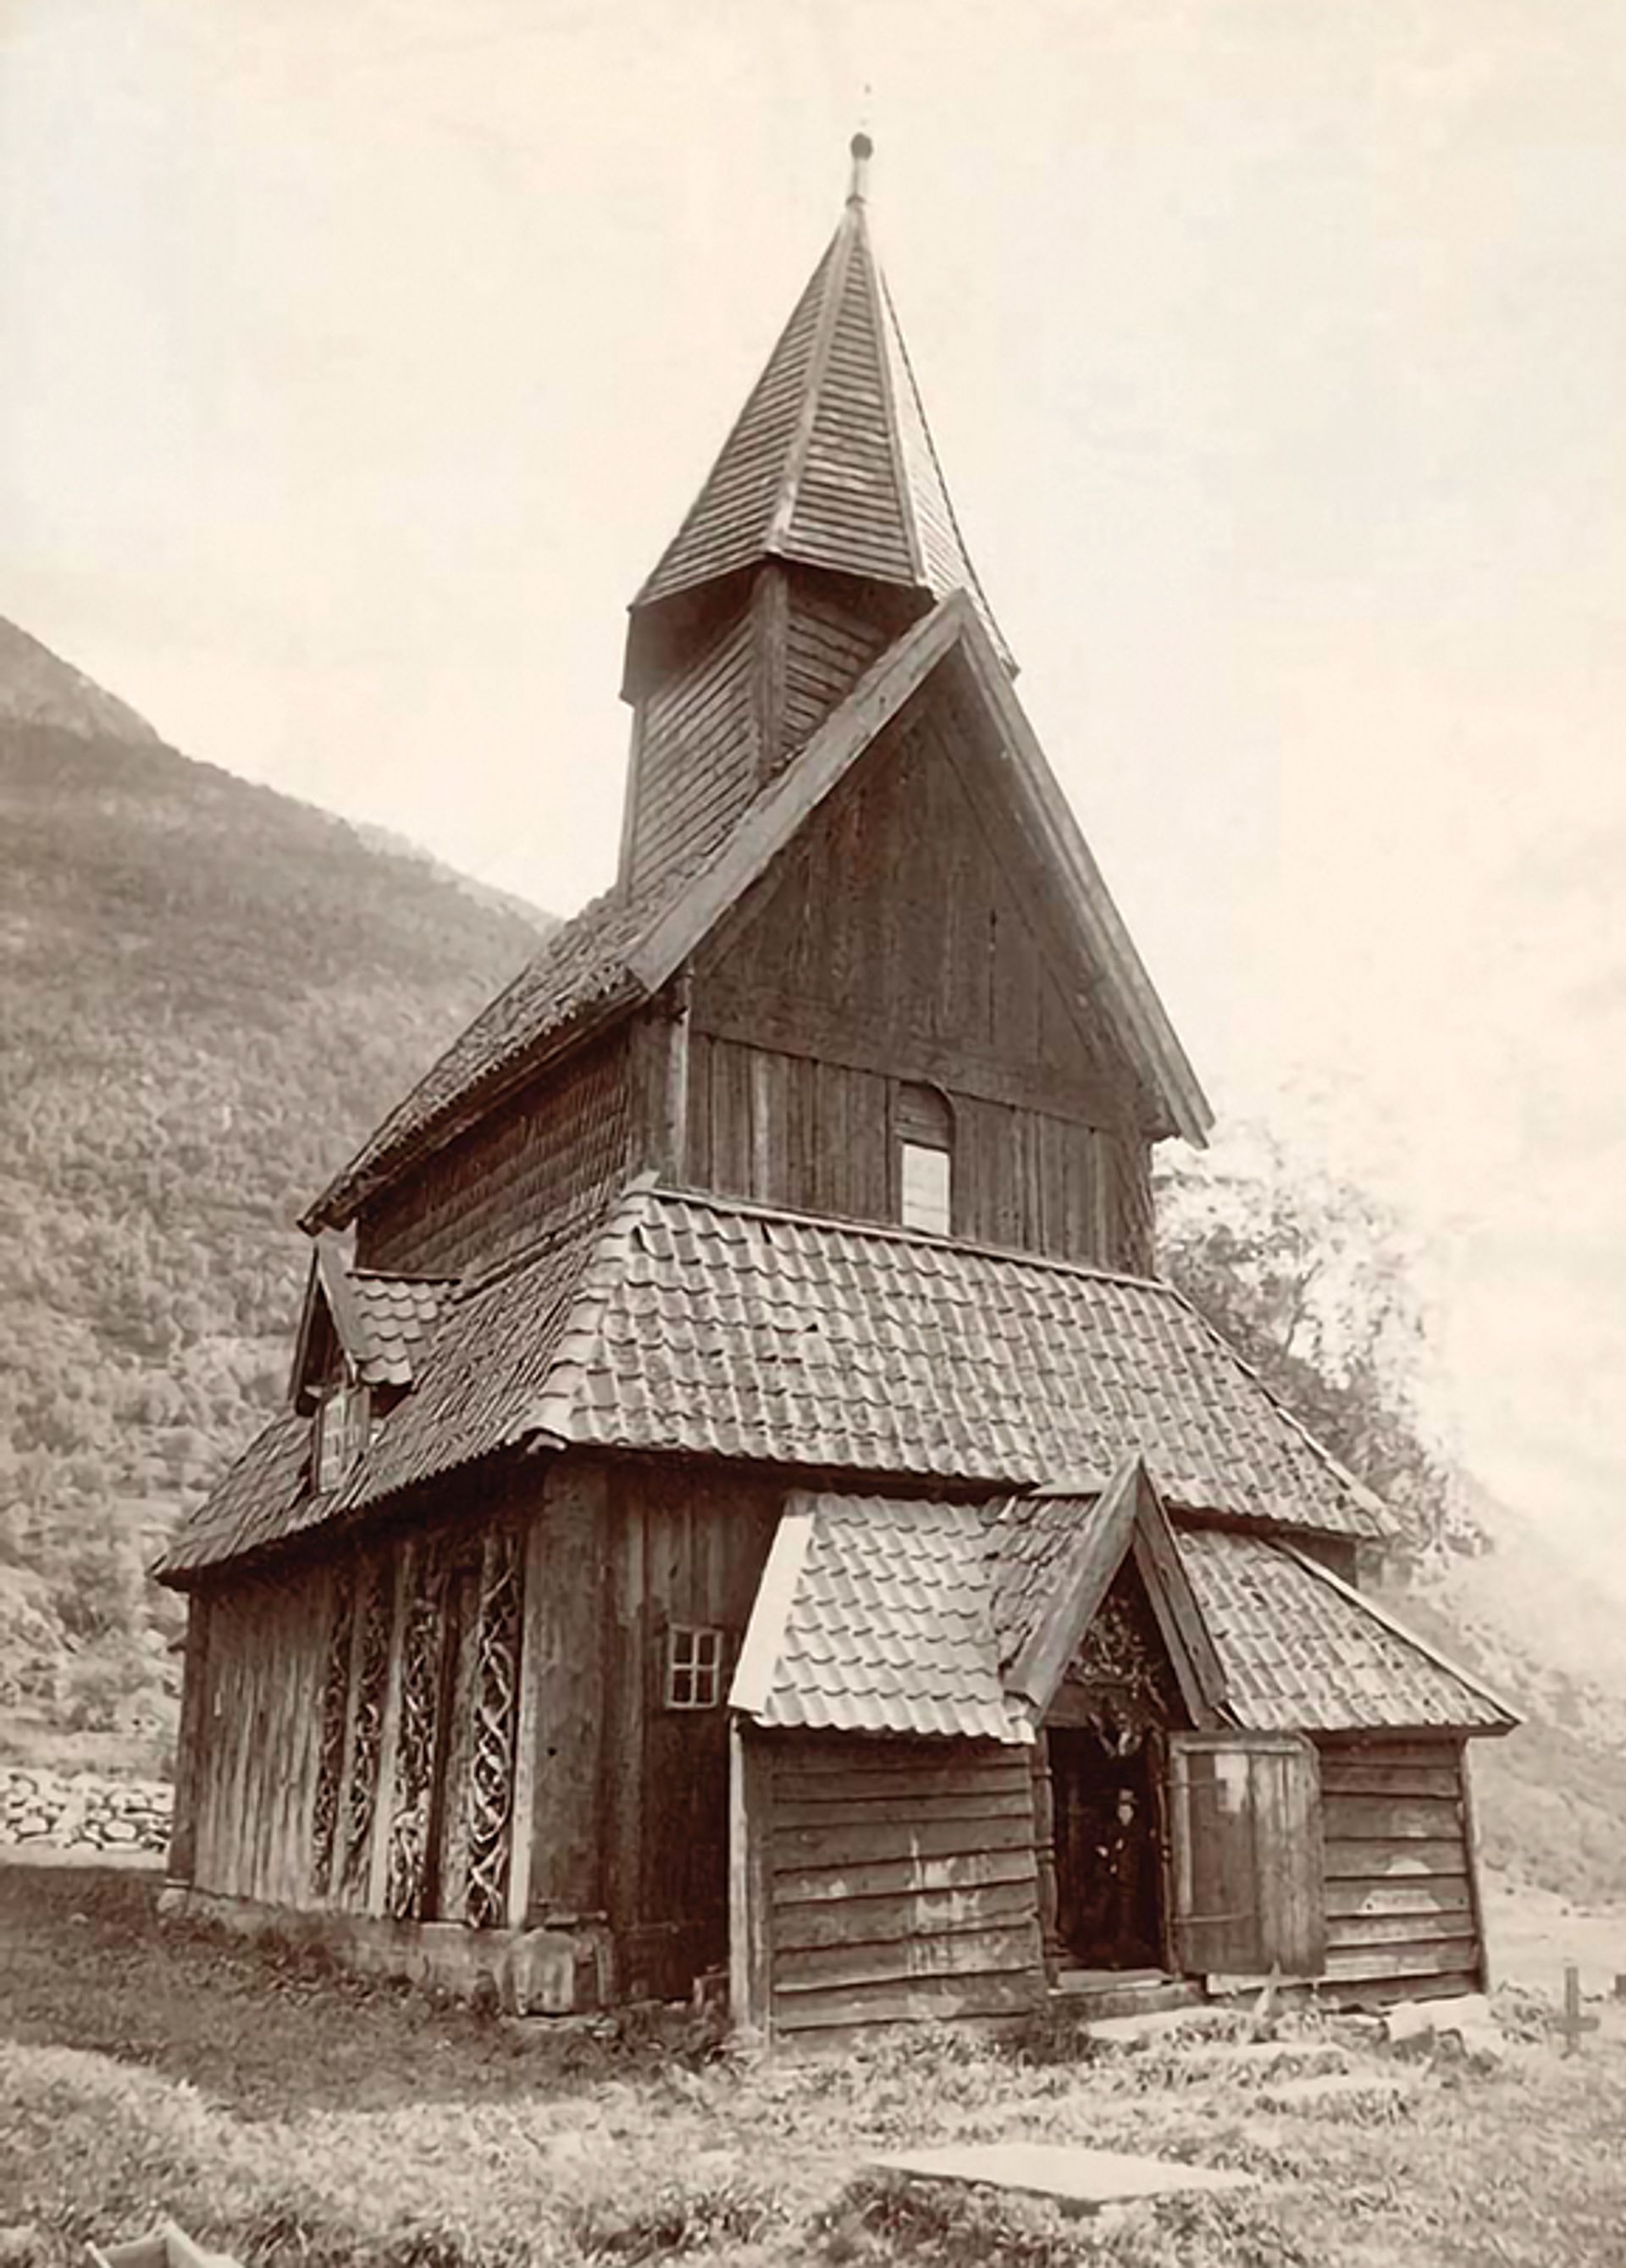 Urnes church in around 1890, showing the ‘extraordinary’ reused carvings on the north exterior wall (lower left) Axel Lindahl